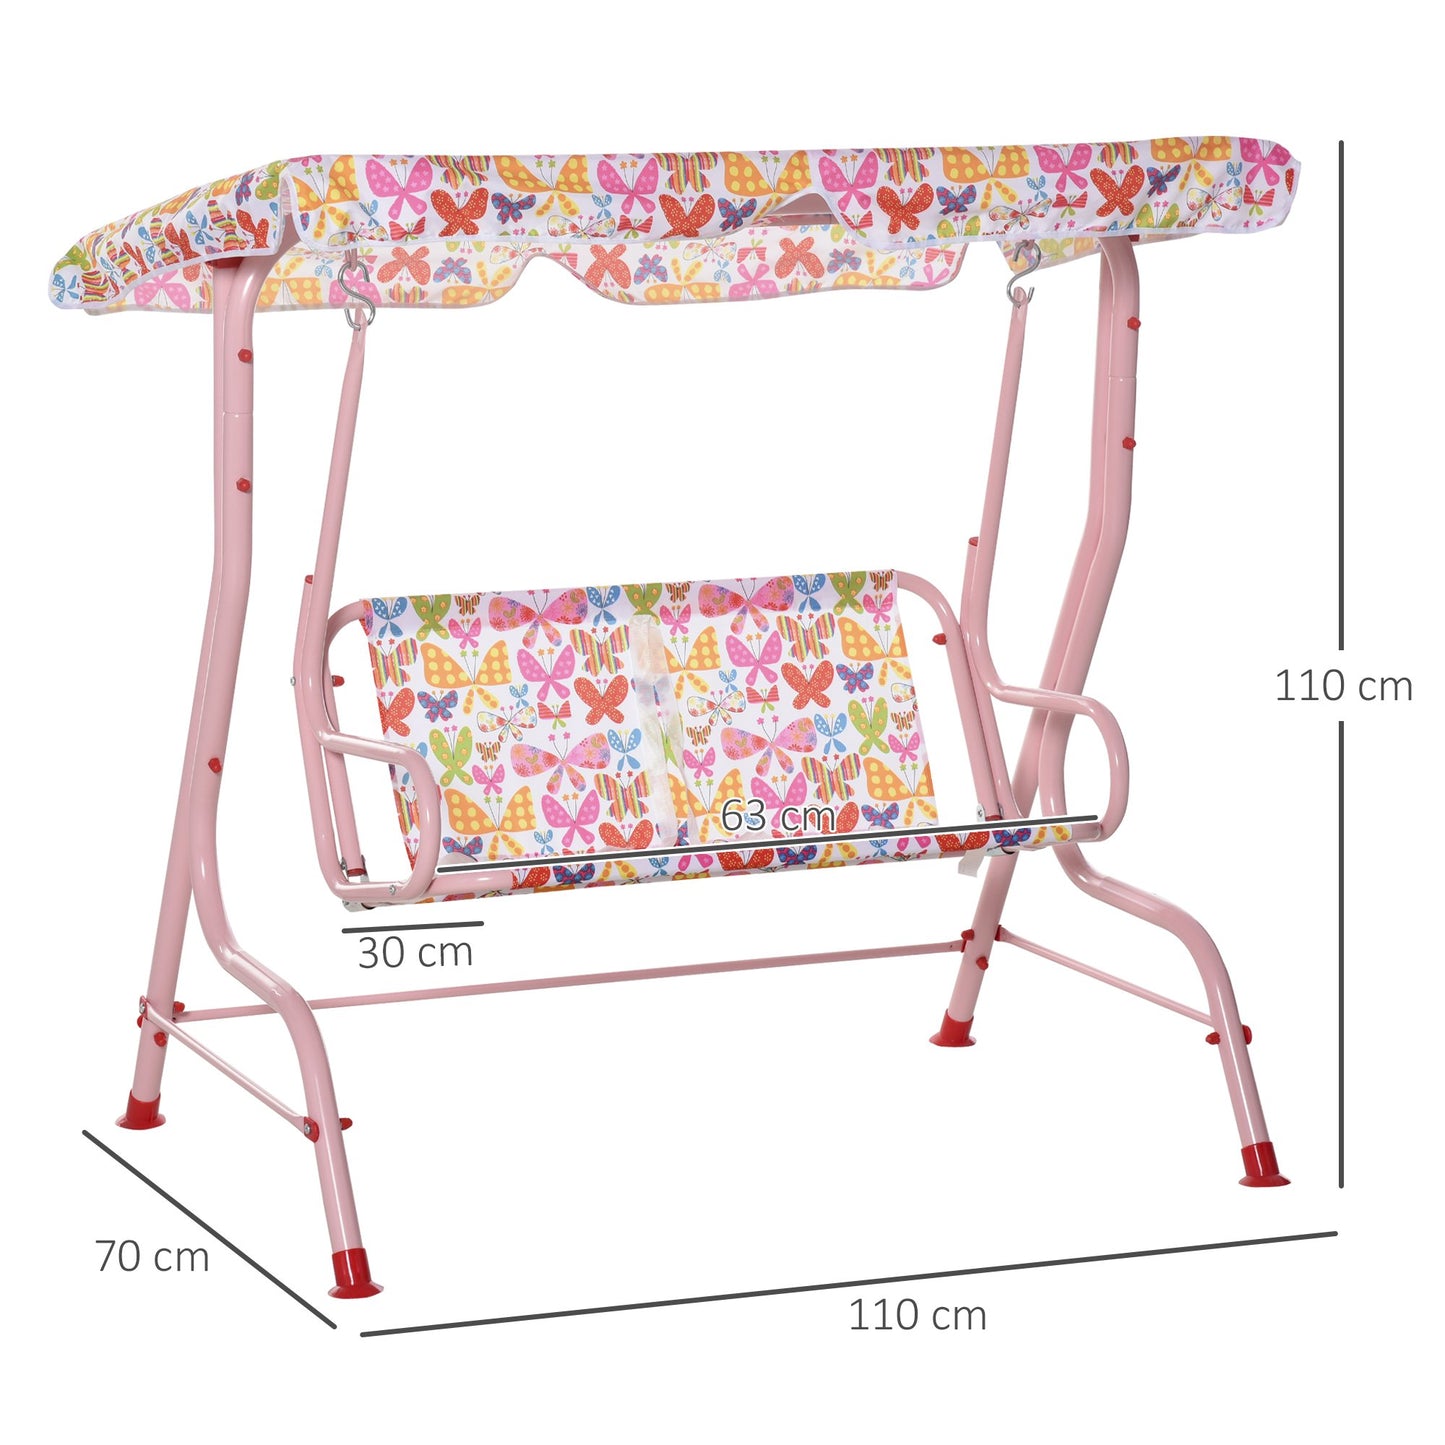 Outsunny 2-Seat Kids Canopy Garden Swing Chair Hammock Lounge Toddler Seat Belt Awning Pink